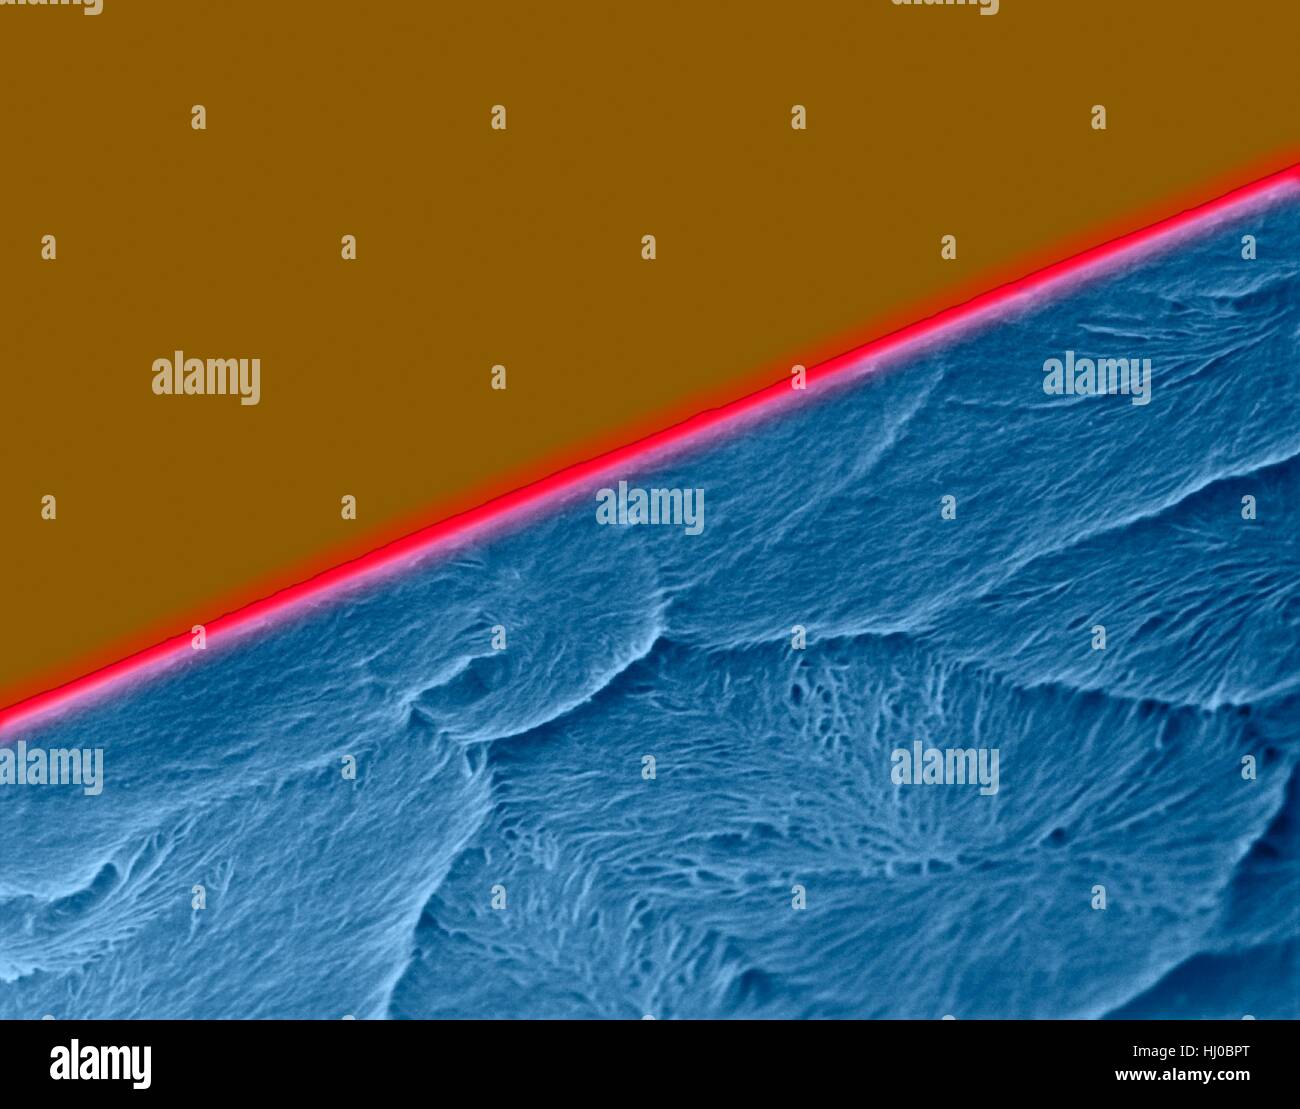 Coloured scanning electron micrograph (SEM) of Edge of a new razor blade (seamless double edge). A razor blade is a thin, sharp-edged piece of steel that can be fitted into a razor. It is used for shaving body hair. Magnification: x575 when shortest axis printed at 25 millimetres. Stock Photo